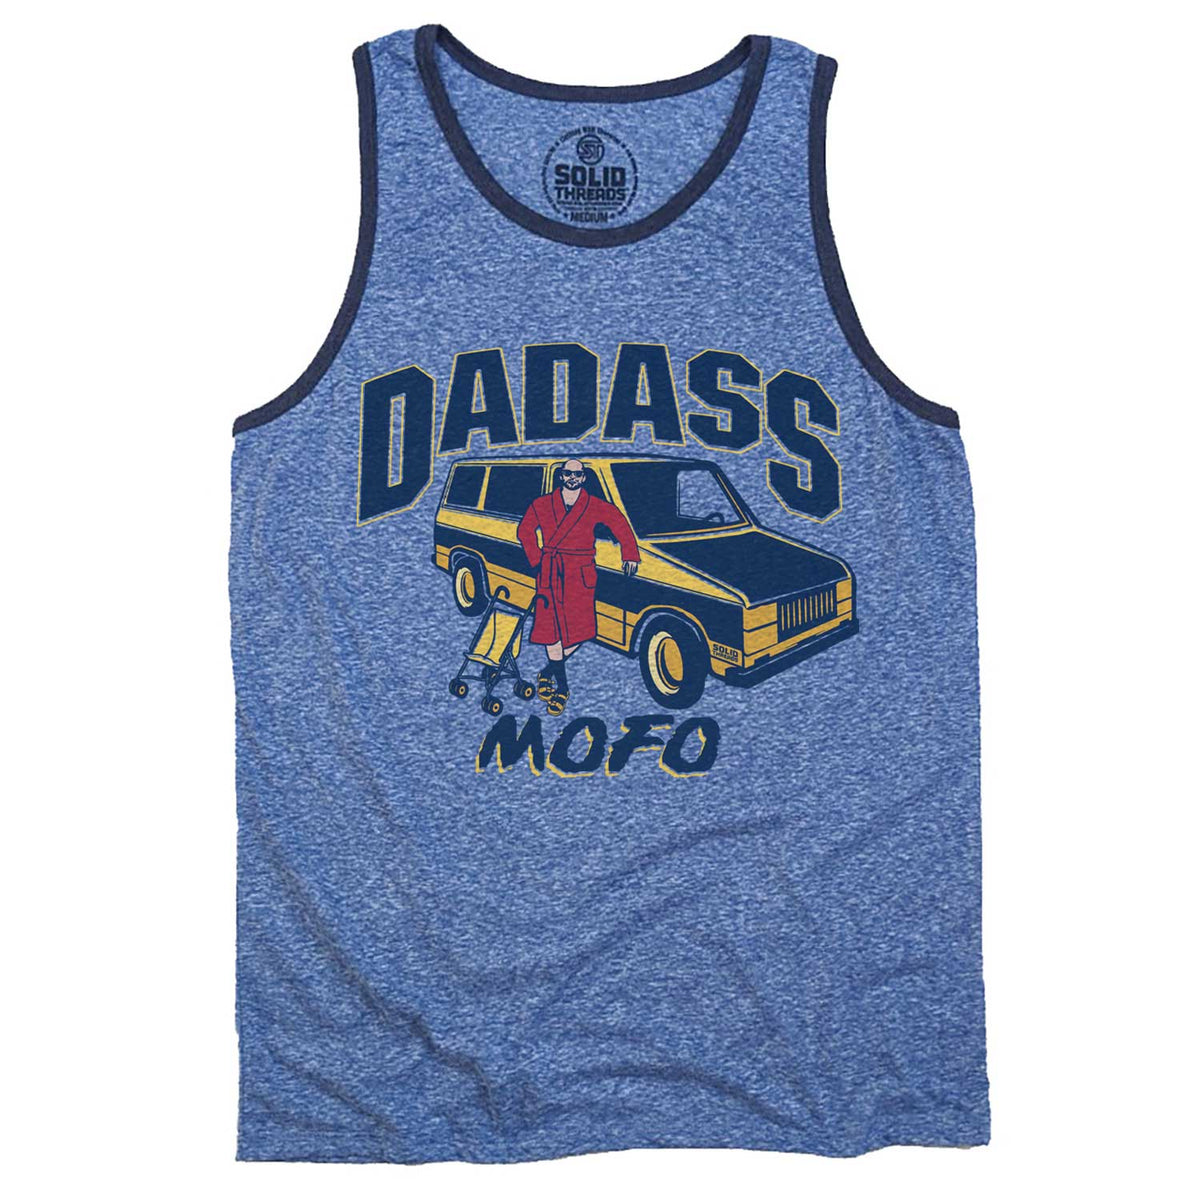 Men&#39;s Dadass Vintage Graphic Tank Top | Funny Dad T-shirt | Solid Threads